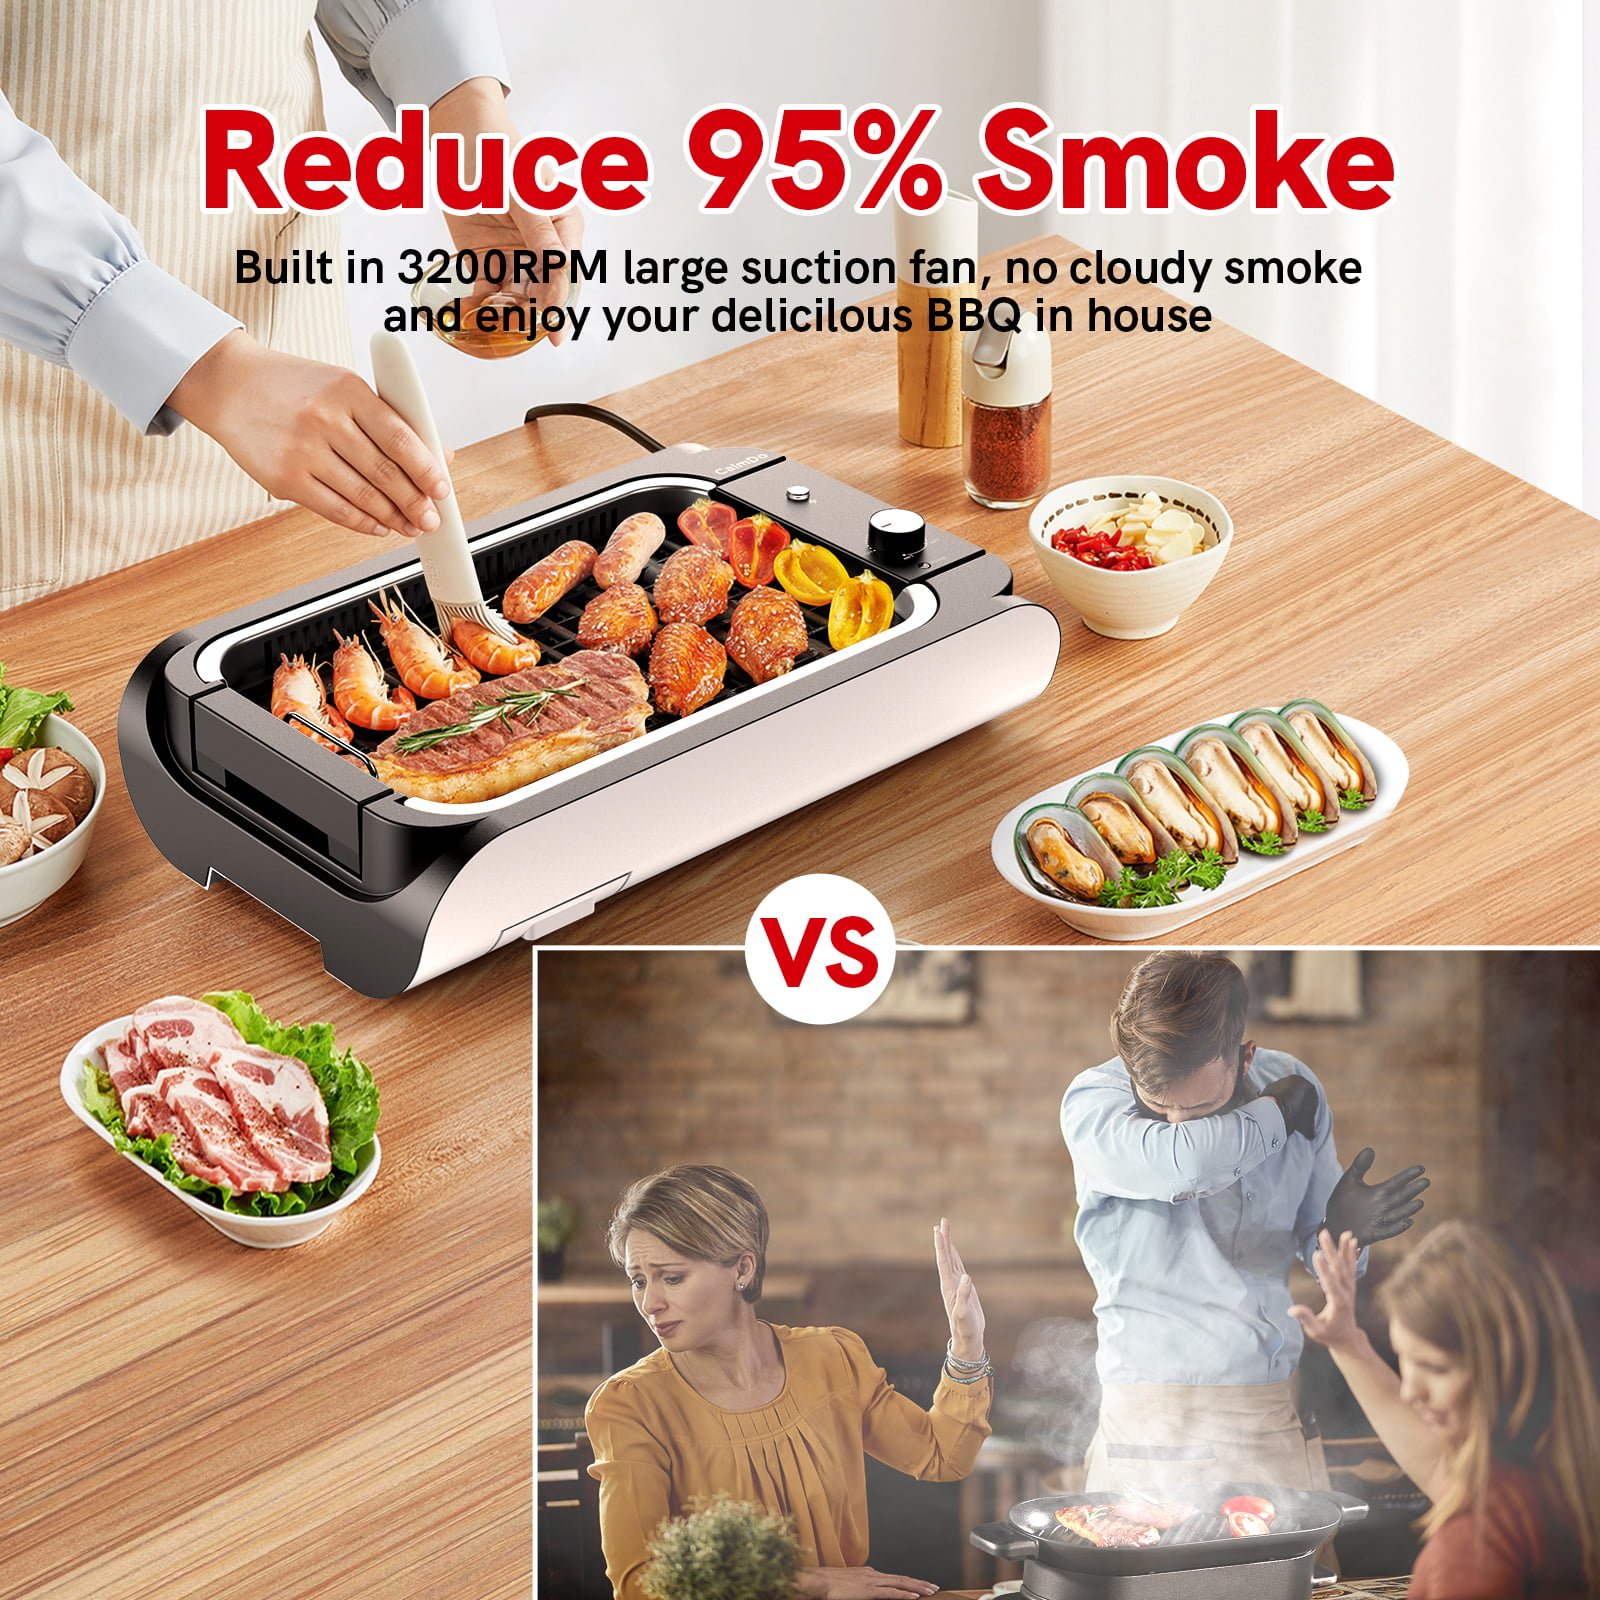 https://themarketdepot.com/wp-content/uploads/2023/01/CalmDo-Electric-Grill-Smokeless-Indoor-Grill-with-Tempered-Glass-Lid-2-in-1-Outdoor-BBQ-Grill-with-Removable-Nonstick-Grill-Plate-and-Drip-Tray-Fast-HeatingDishwasher-Safe-Black-3.jpeg